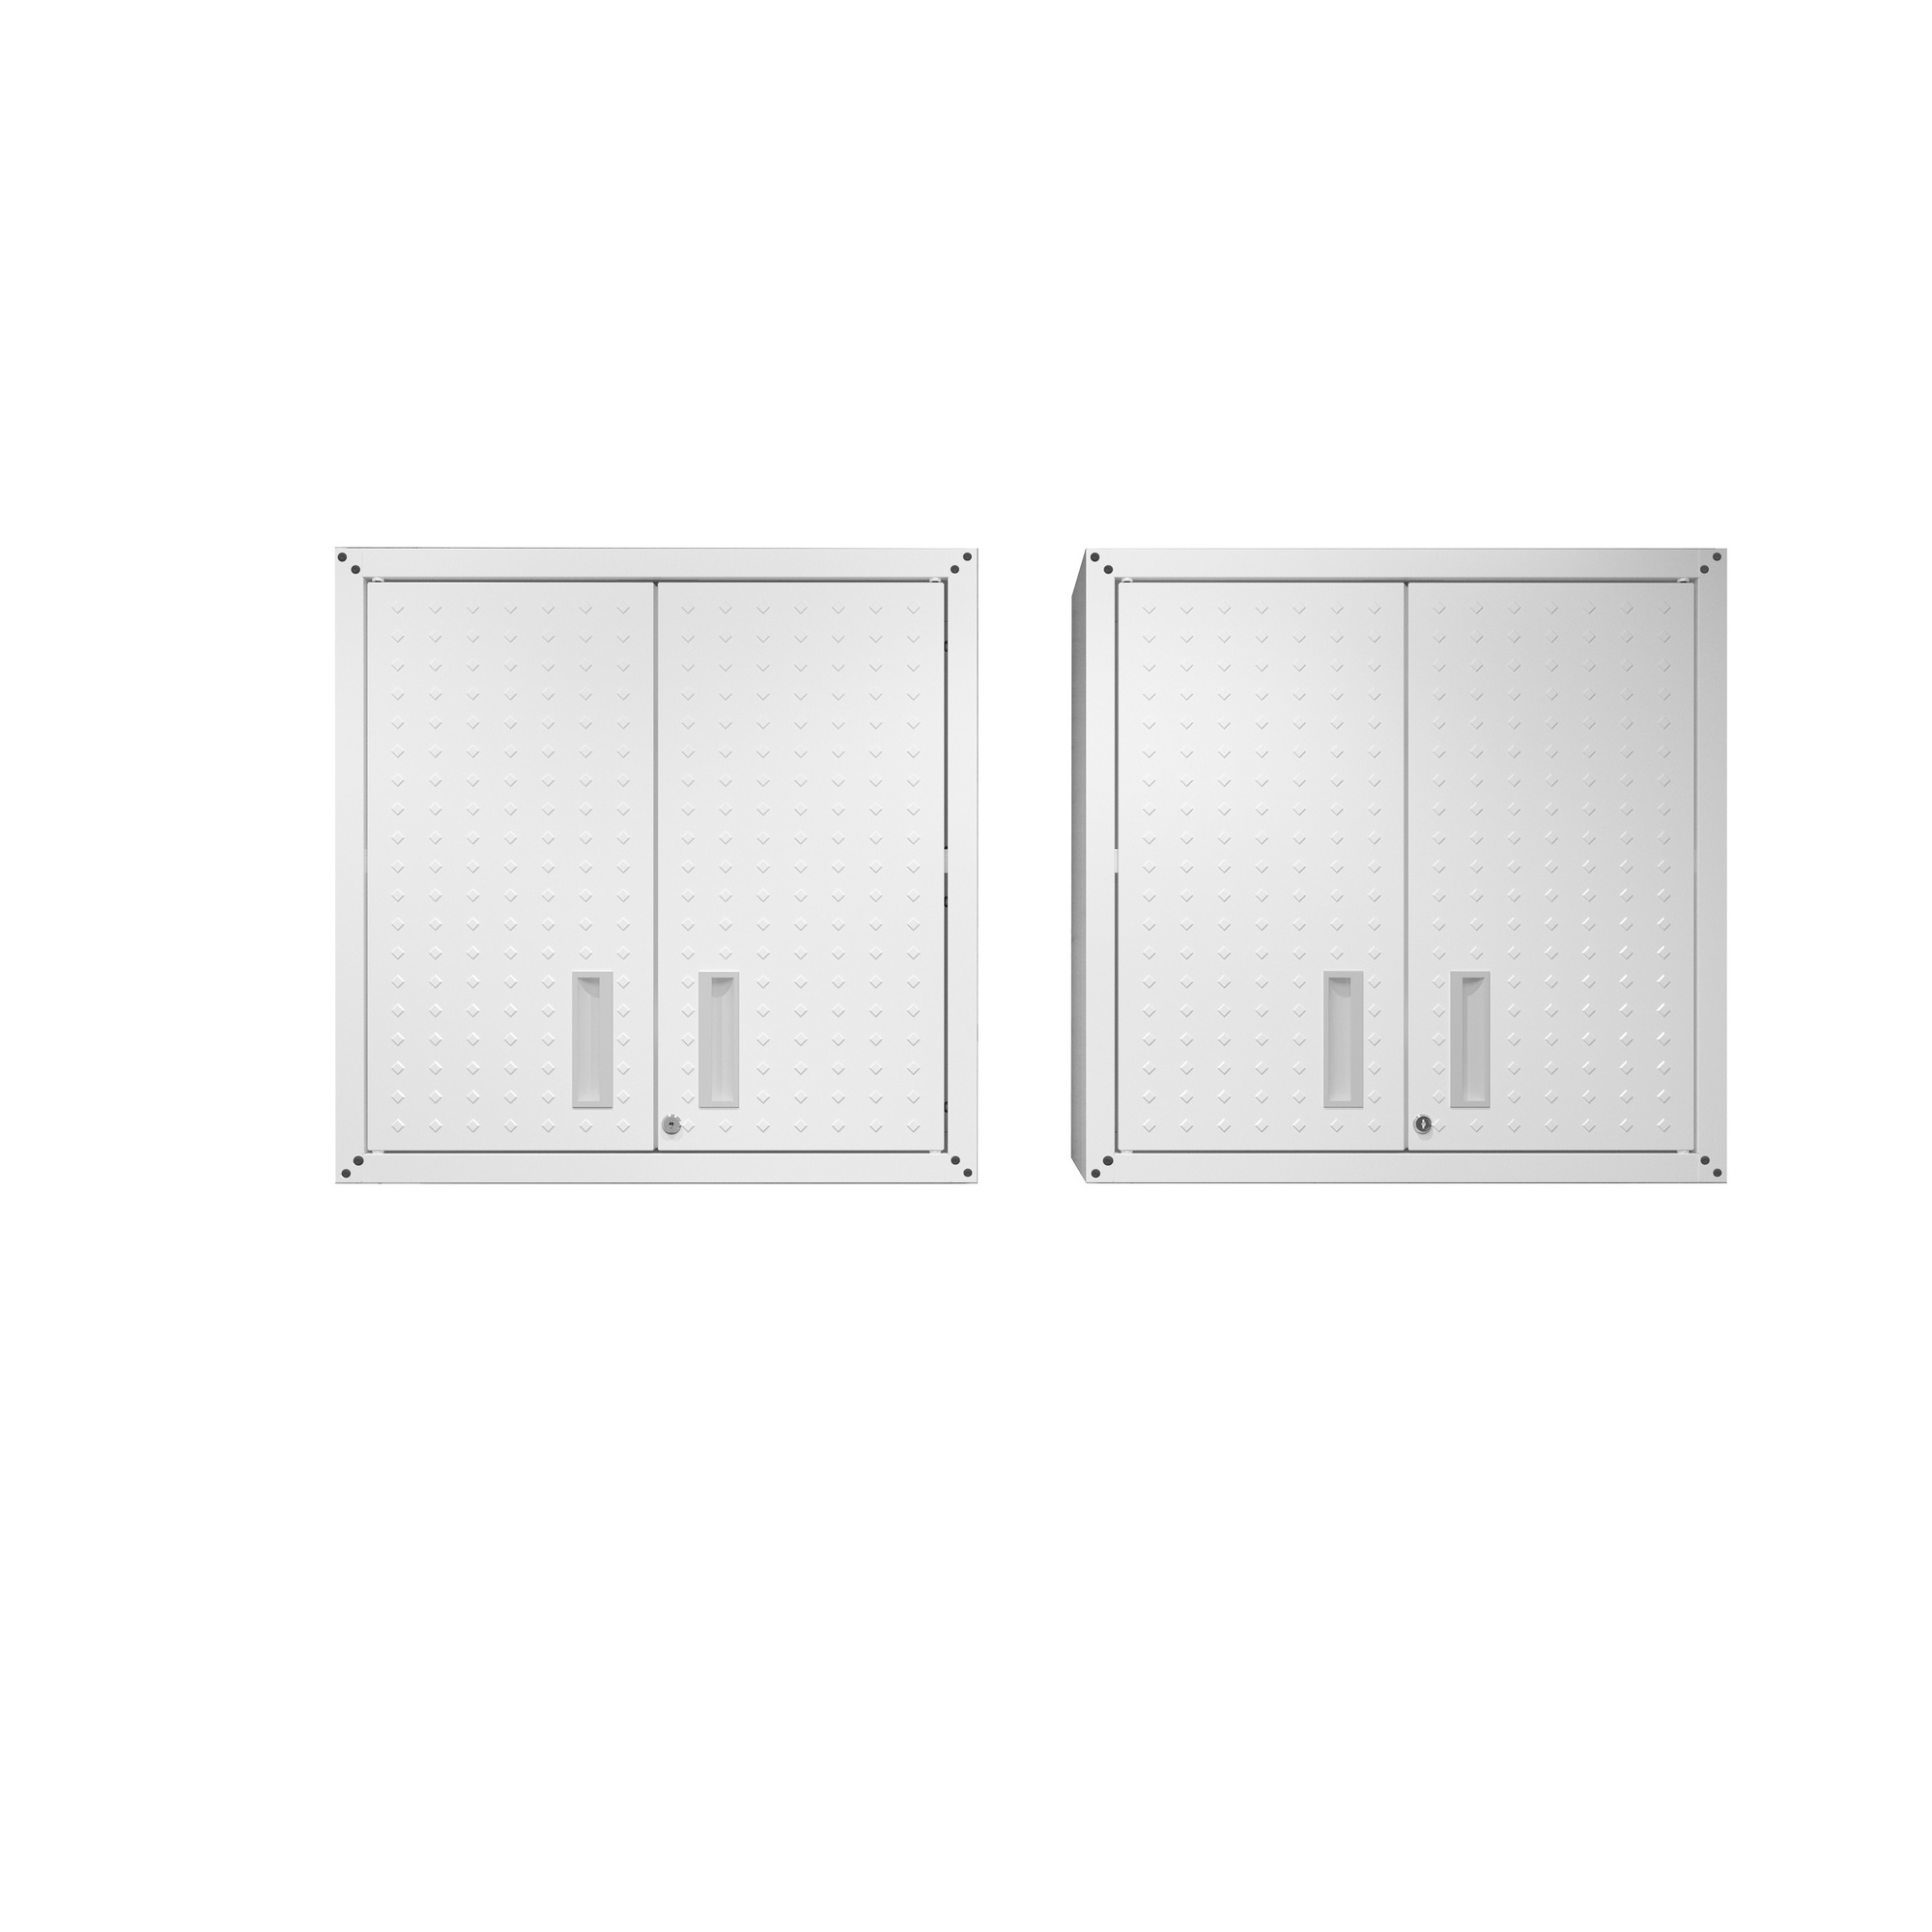 Manhattan Comfort, Fortress Floating Garage Cabinet in White Set of 2 Height 30.3 in, Width 30 in, Color White, Model 2-5GMC